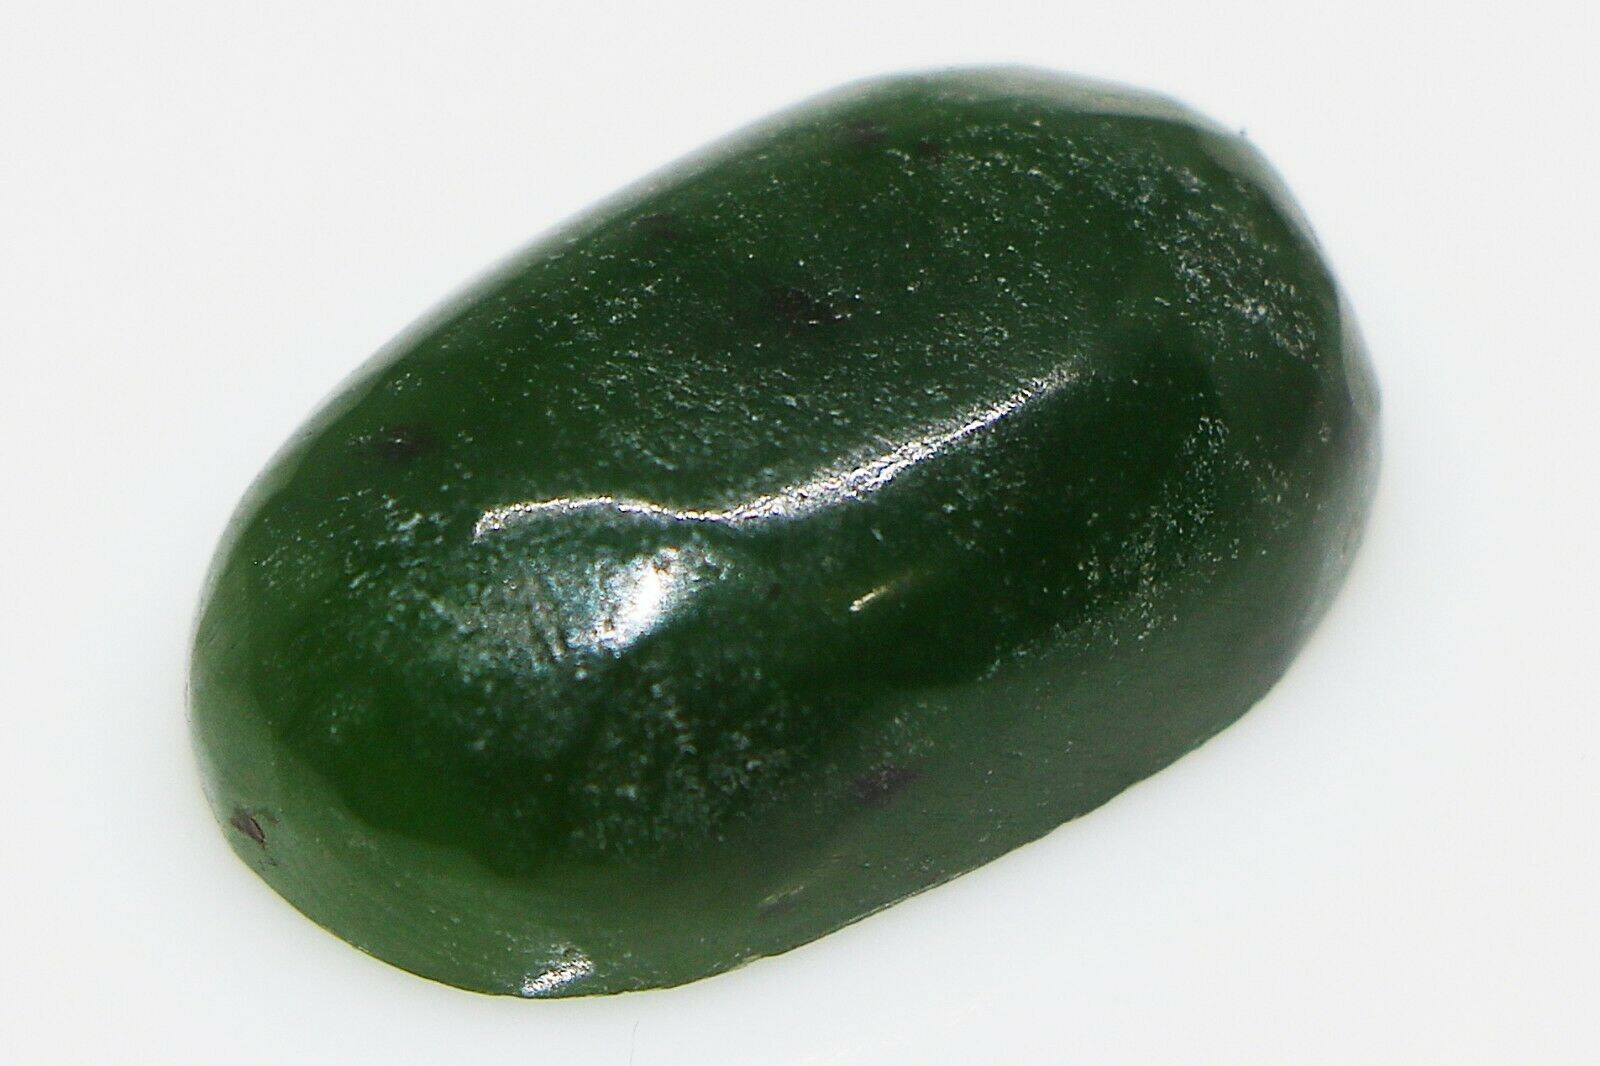 Natural Rare Green Nephrite Jade Stone Loose Cabochon With Certificate -23.09ct